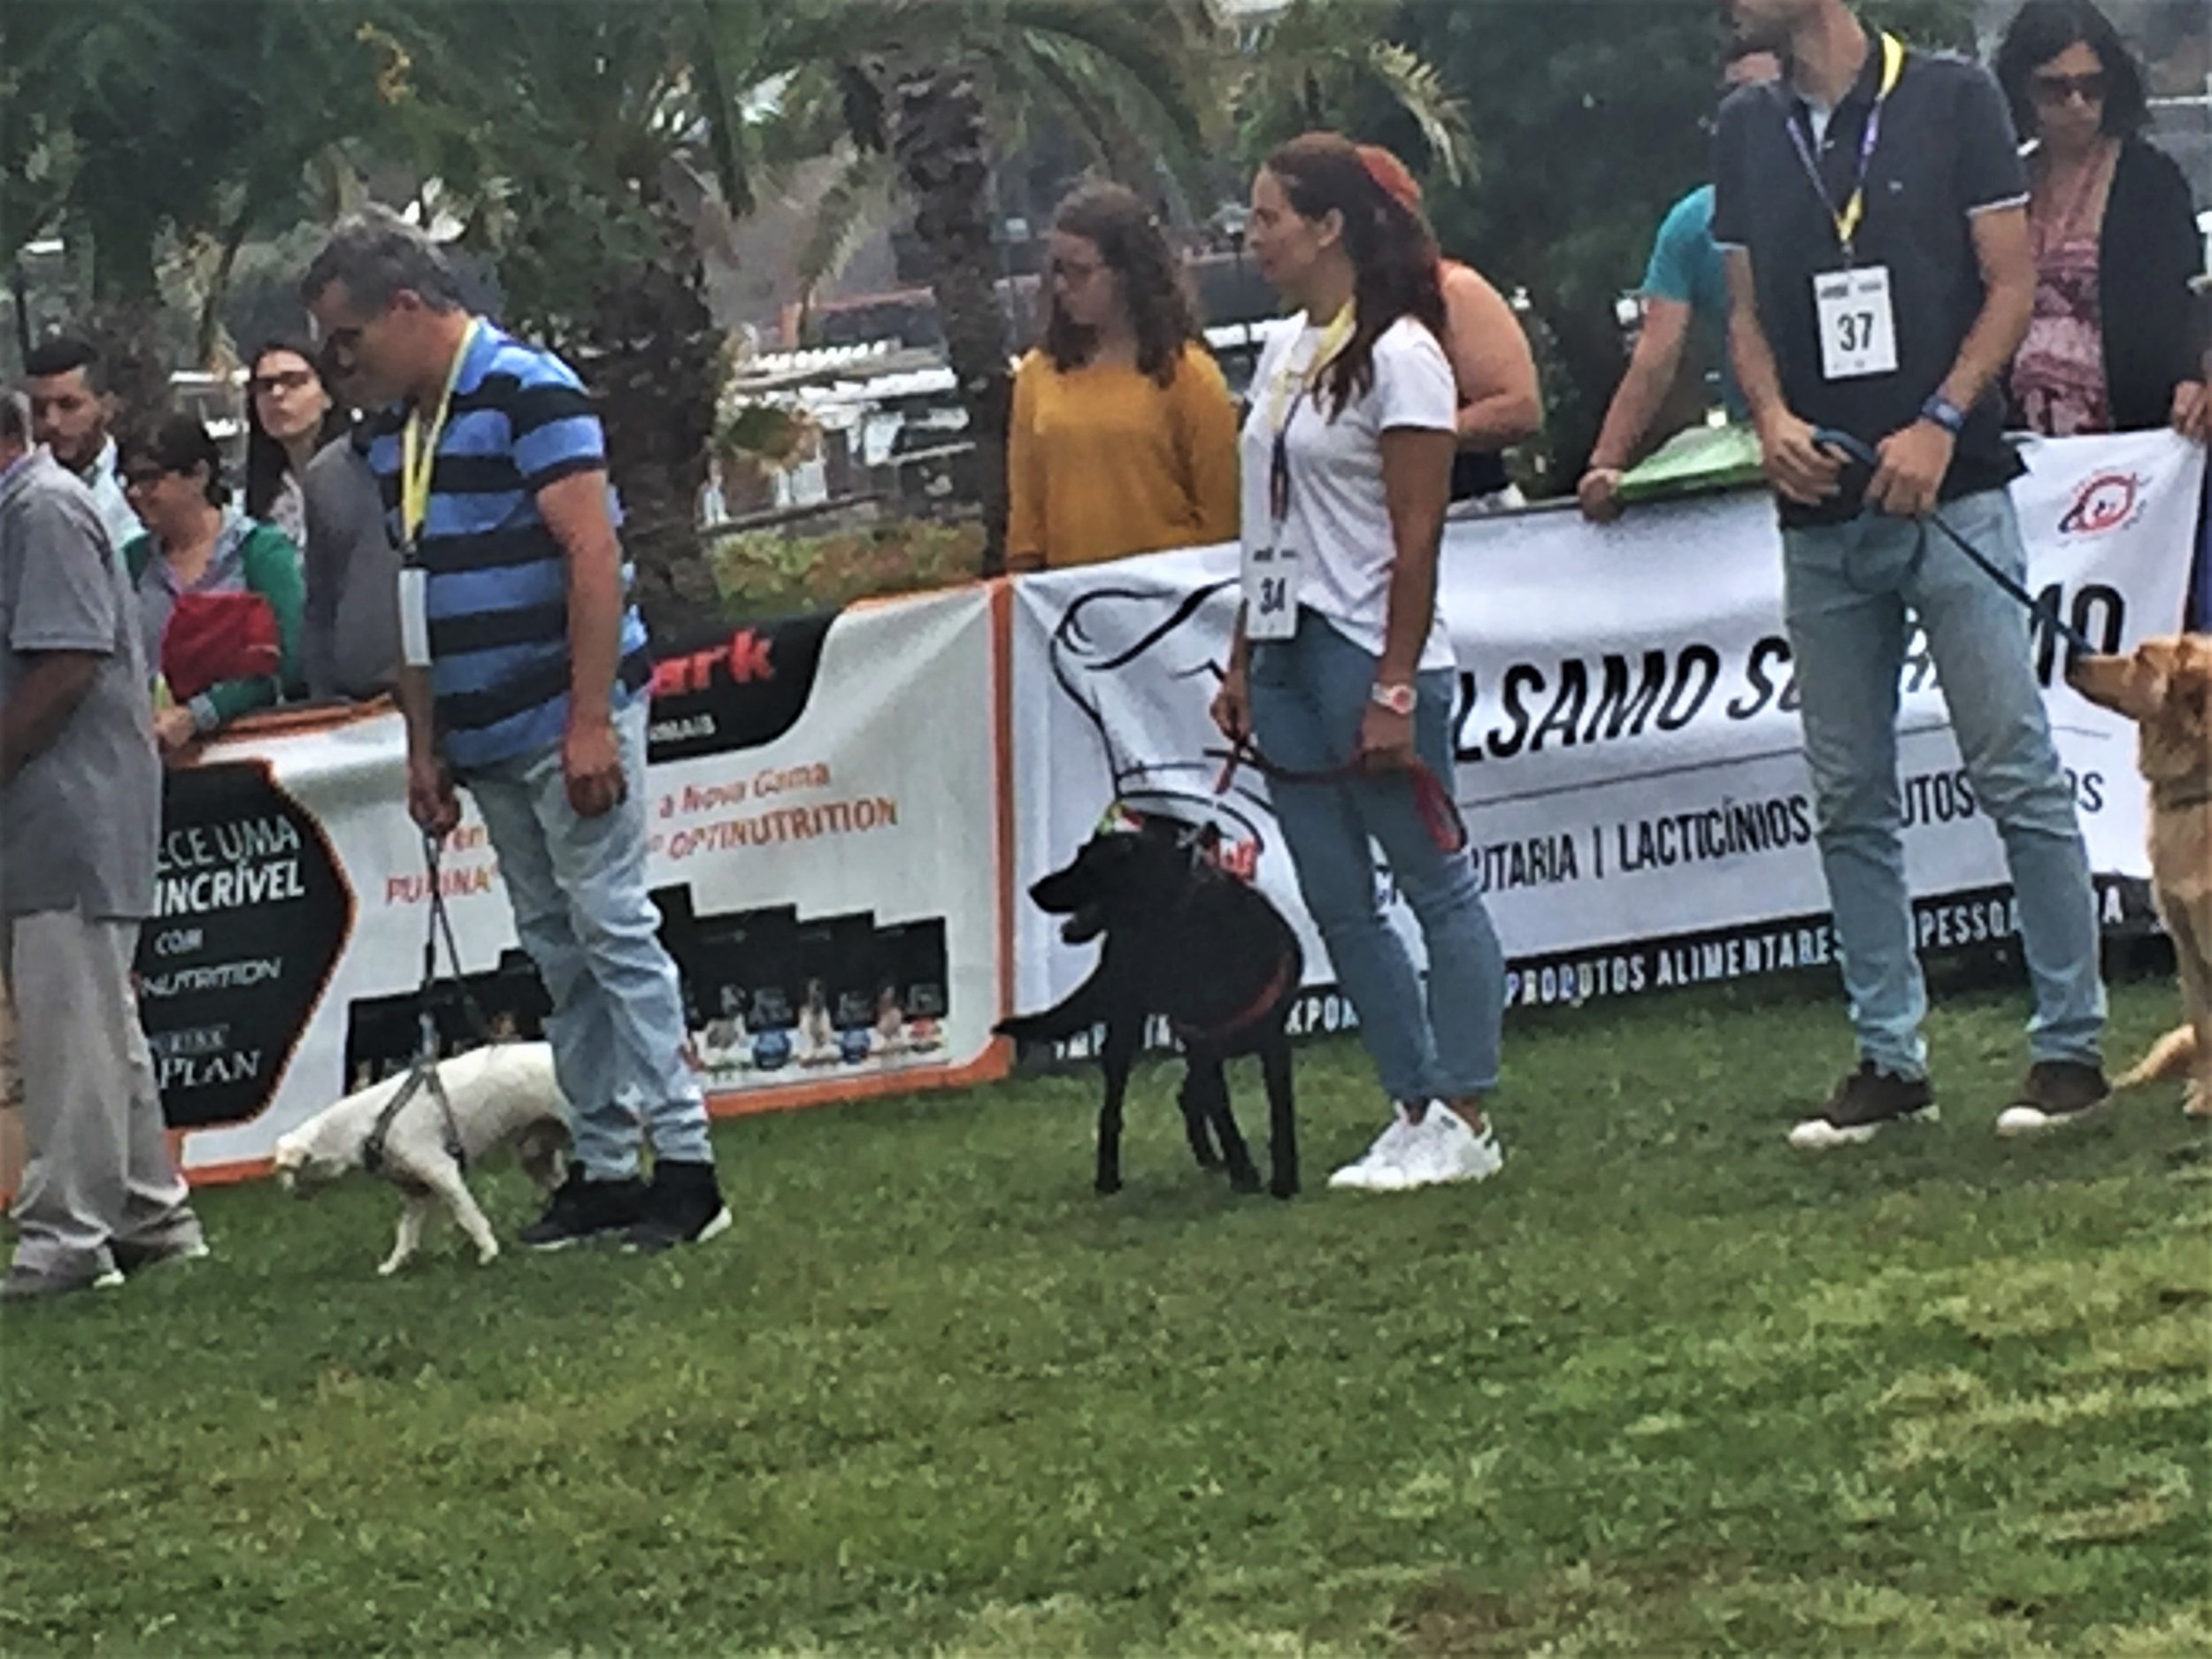 Locals parading their dogs for show in Madeira